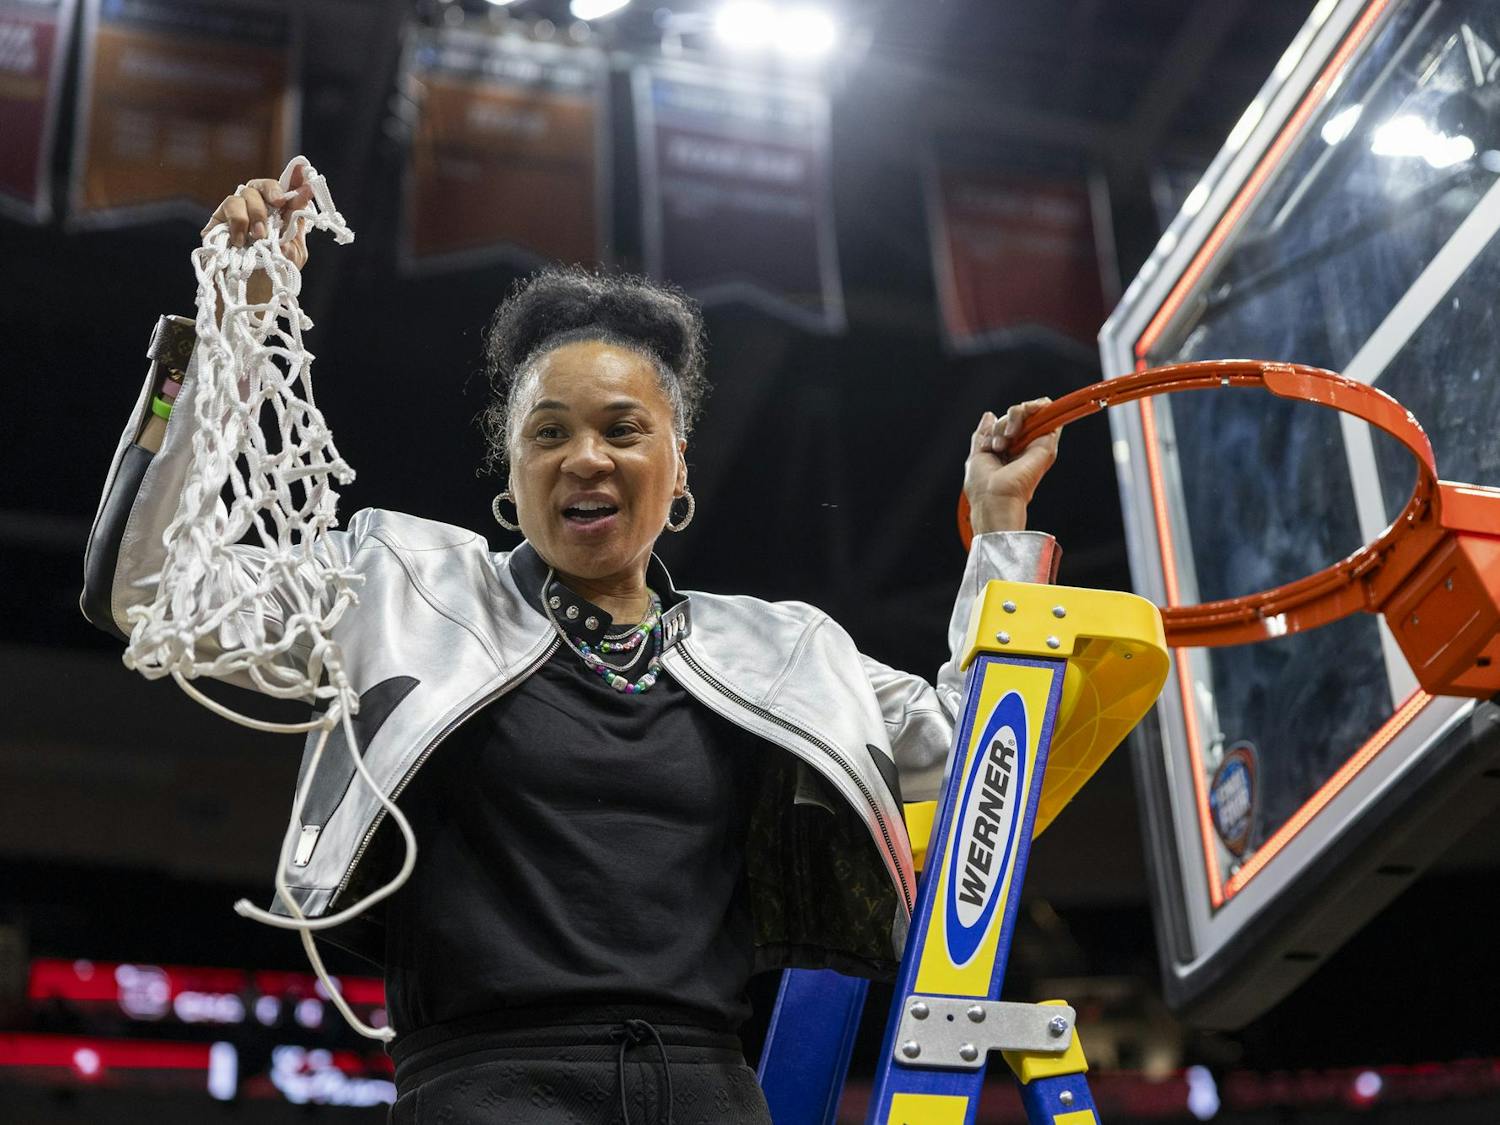 The South Carolina ɫɫƵs’ emerged victorious from a close matchup against the Iowa Hawkeyes to secure the national championship title with an undefeated season on April 7, 2024. The ɫɫƵs defeated the Hawkeyes 87-75 at Rocket Mortgage FieldHouse in Cleveland, Ohio. Freshman guard Tessa Johnson led the ɫɫƵs in scoring with 19 points, a career high. Johnson and senior center Kamilla Cardoso earned all-tournament honors. This is the third time that the ɫɫƵs earned an NCAA title, and the first with an undefeated season, making the team the 10th team to do so in the history of the tournament.